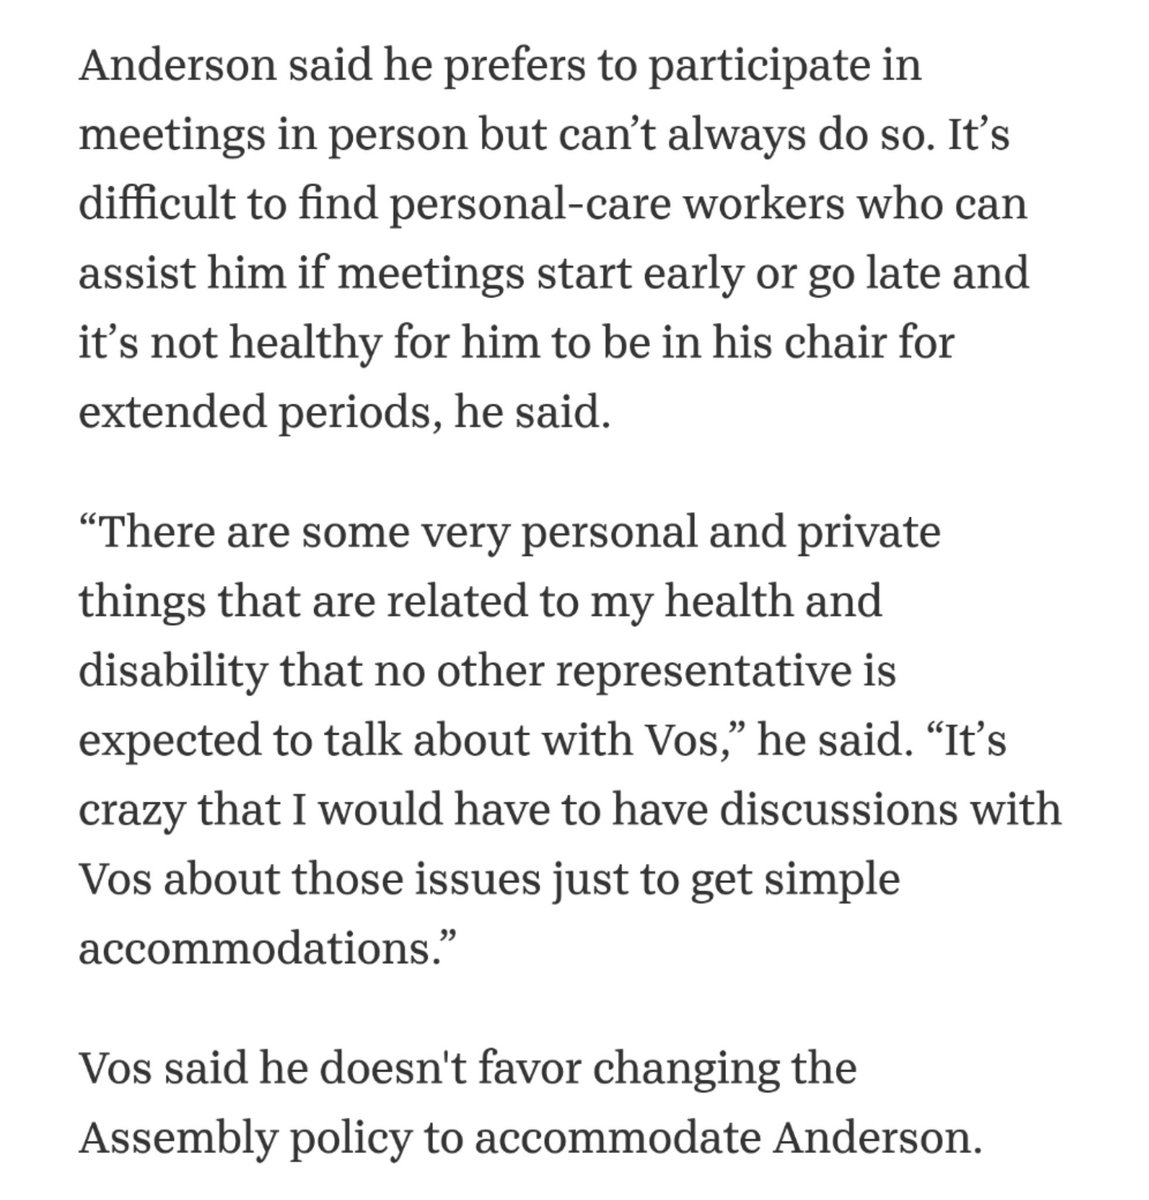 The thing to understand about Robin Vos is that he's a bad person  https://www.jsonline.com/story/news/politics/2019/07/29/leaders-wont-let-lawmaker-who-uses-wheelchair-phone-into-meetings/1830851001/